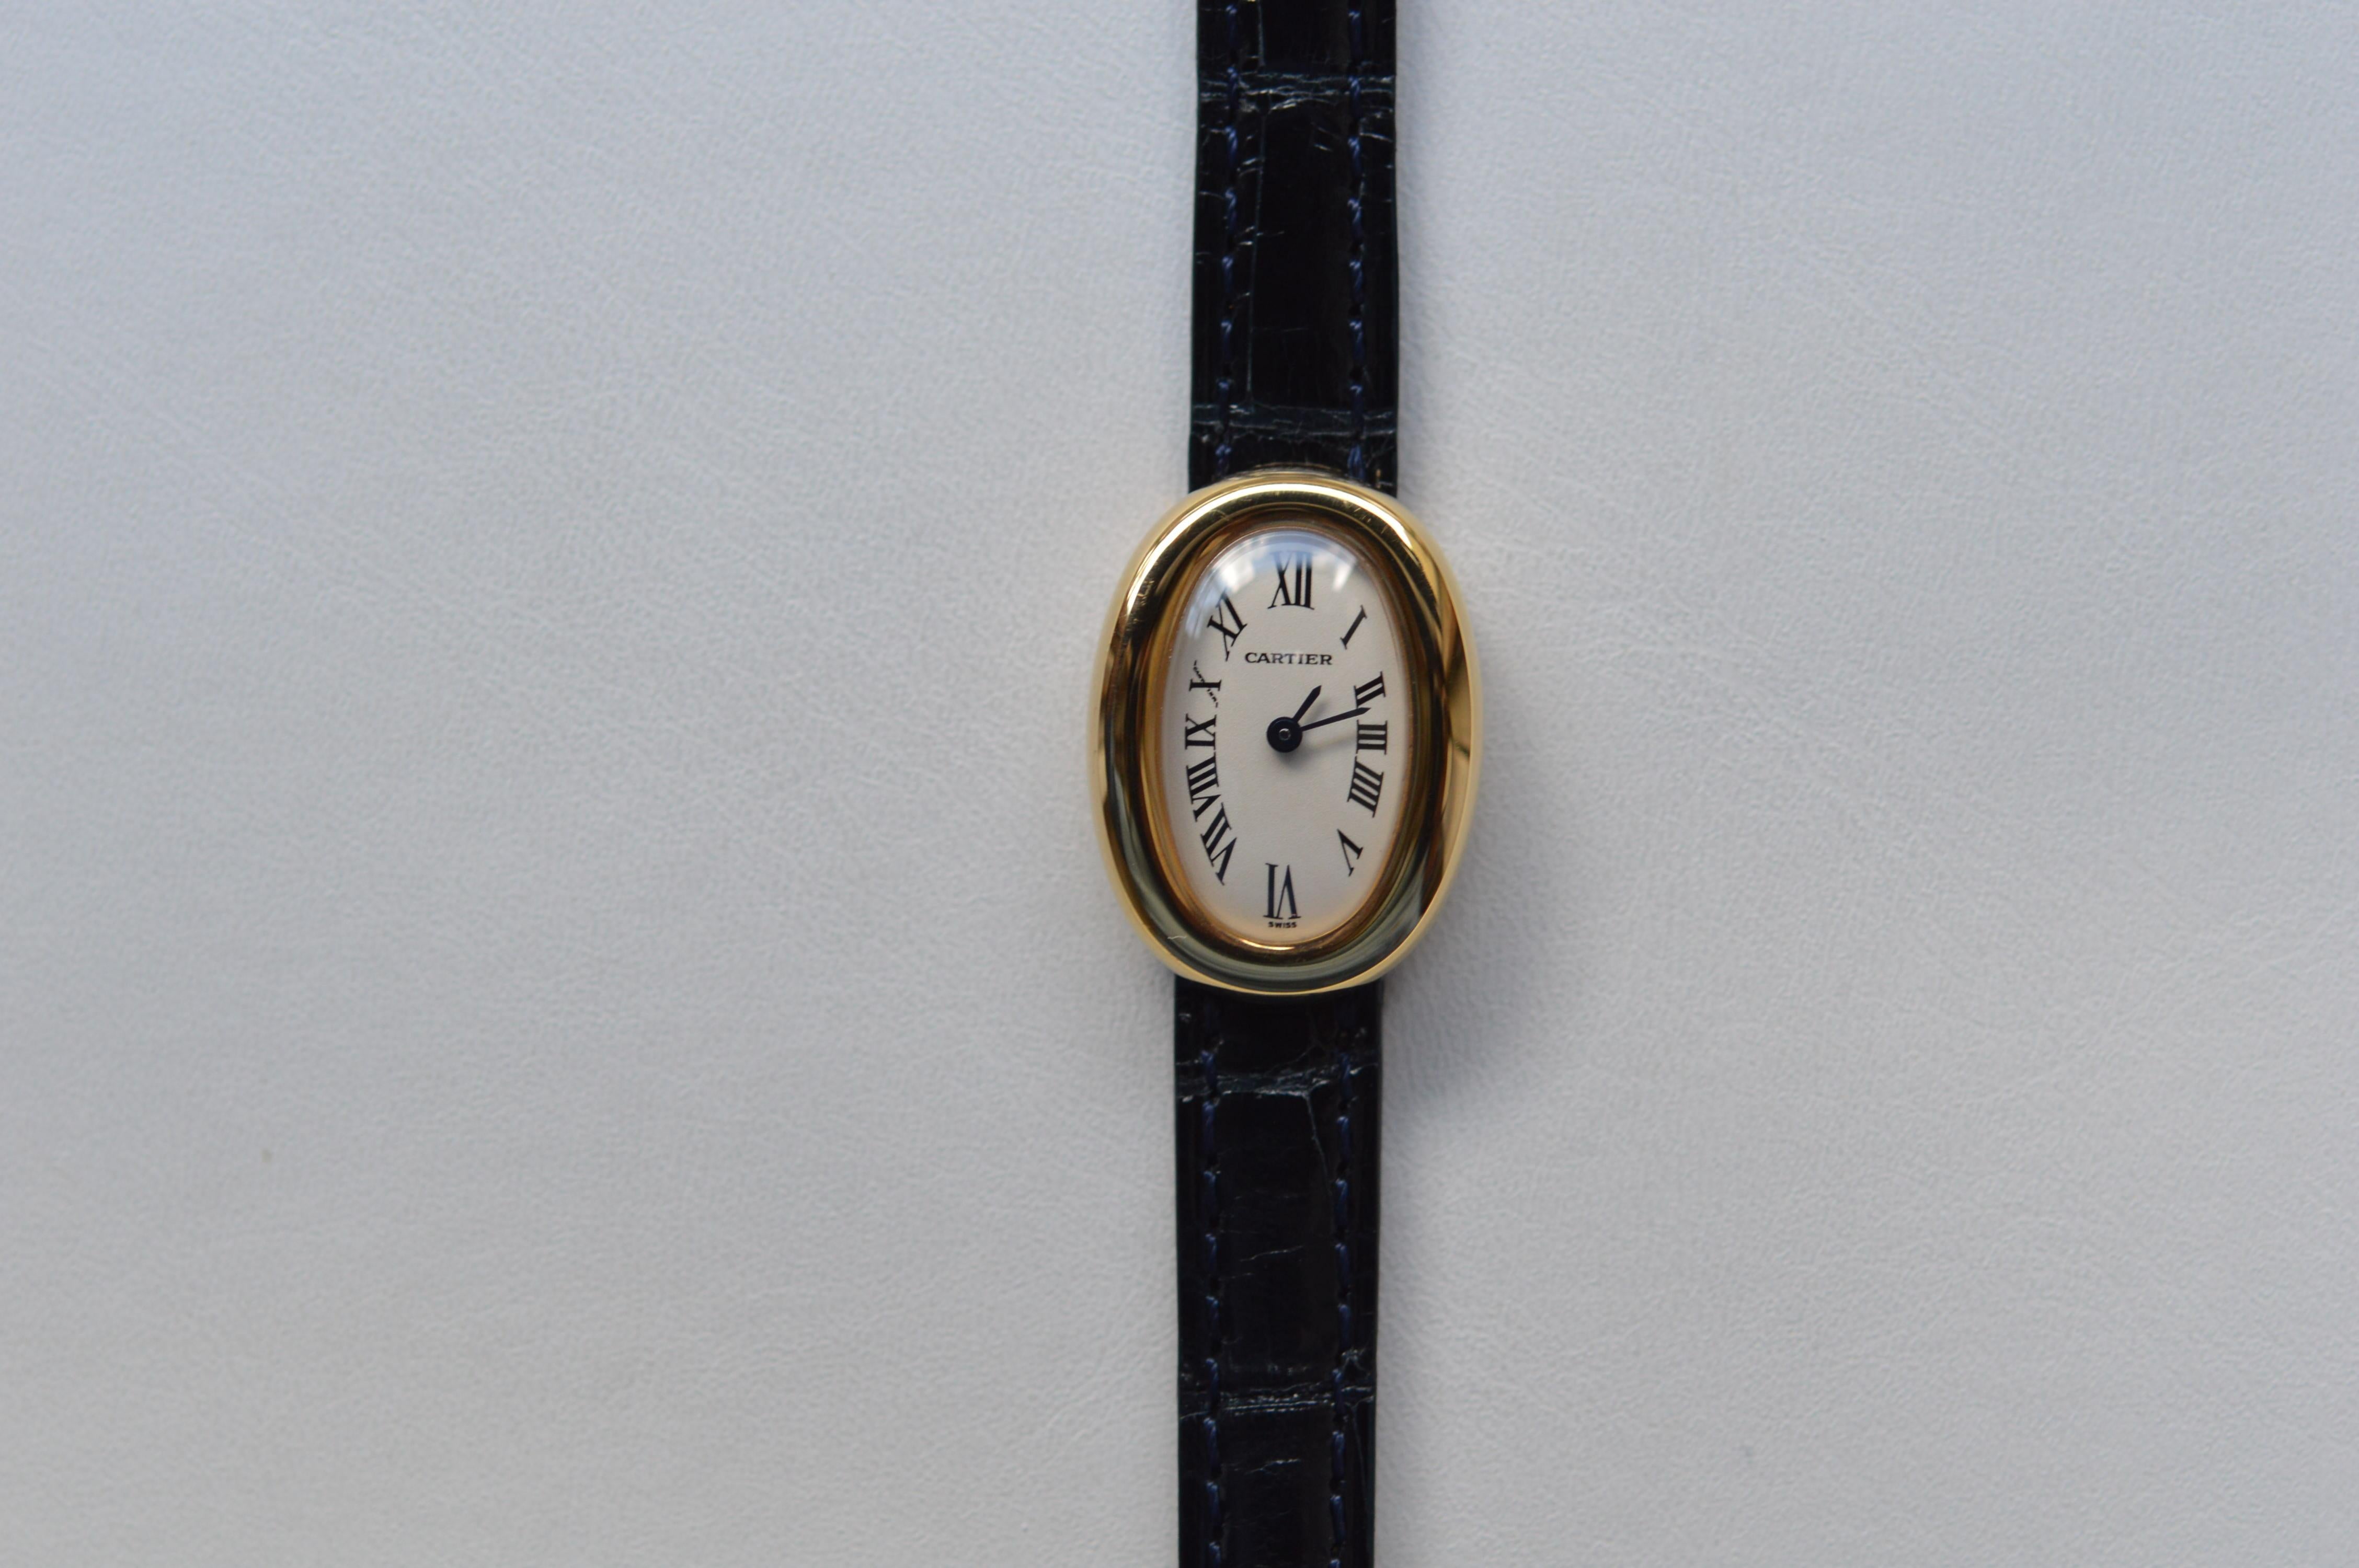 Cartier Mini Baingoire 18K Yellow Gold
Reference n° W1510956
24mm X 18mm Size
18K Yellow Gold Case
Cream/White Dial
Blue Leather Strap
Blued Steel Sword Shaped Hands
Water Resistant 3ATM - 30M - 100 FT
Quartz Movement
New Old Stock Condition
Brand